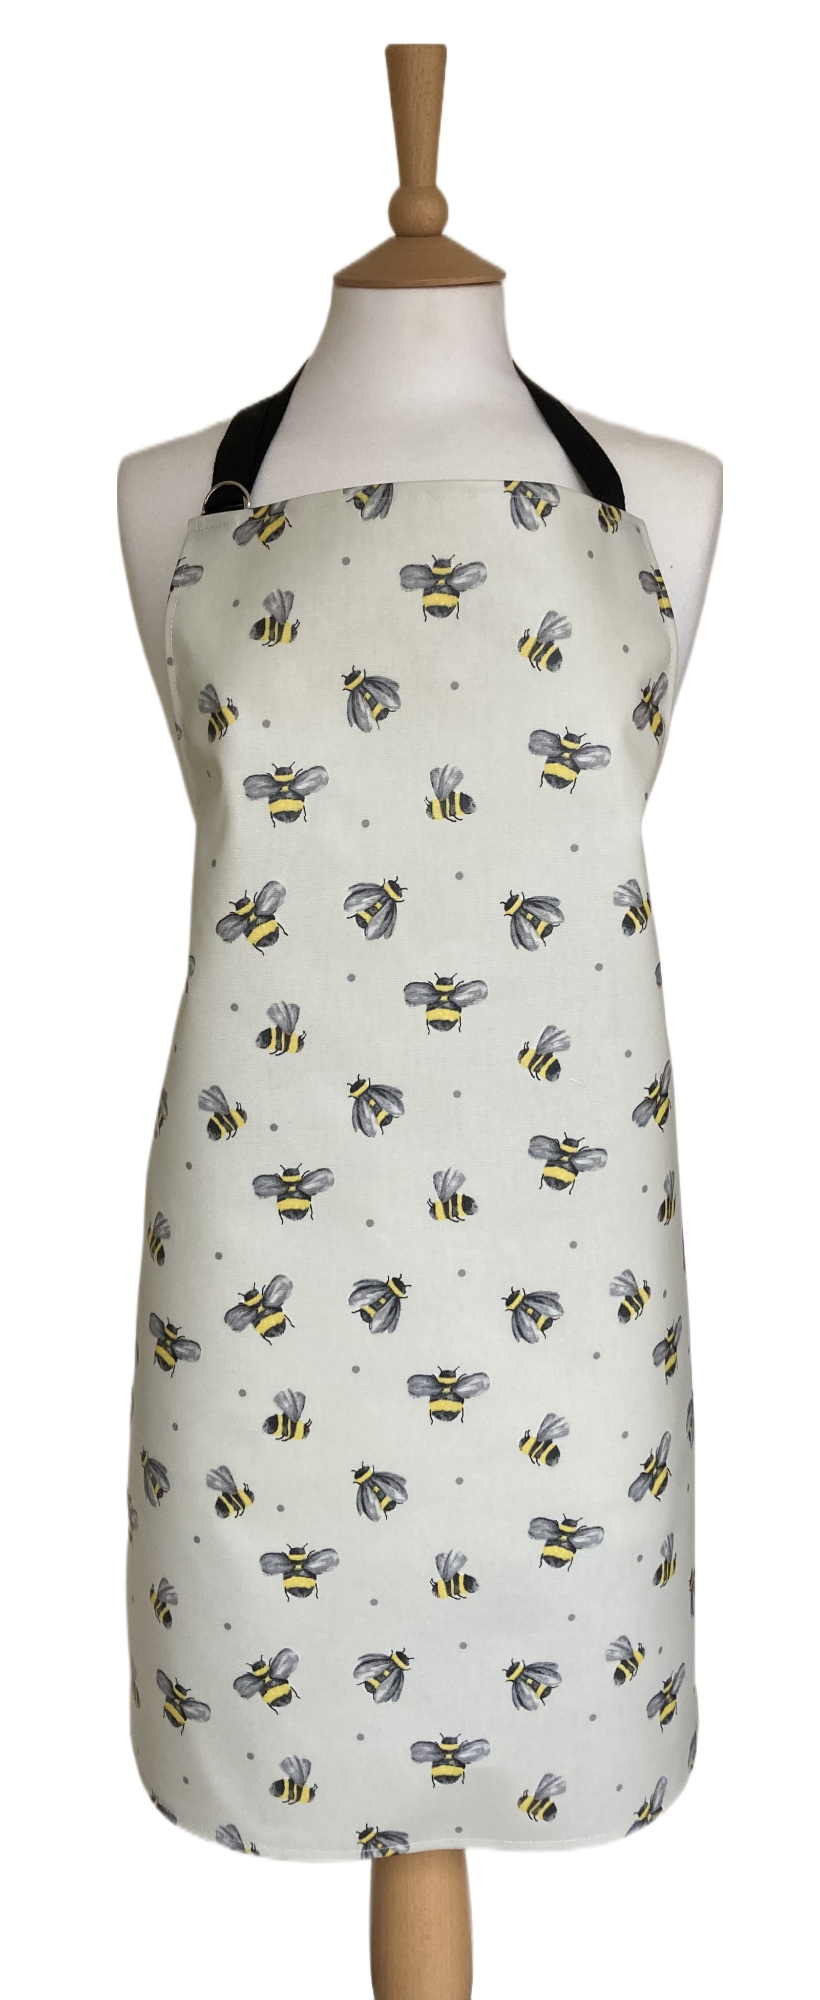 Bees Adult Oilcloth Apron